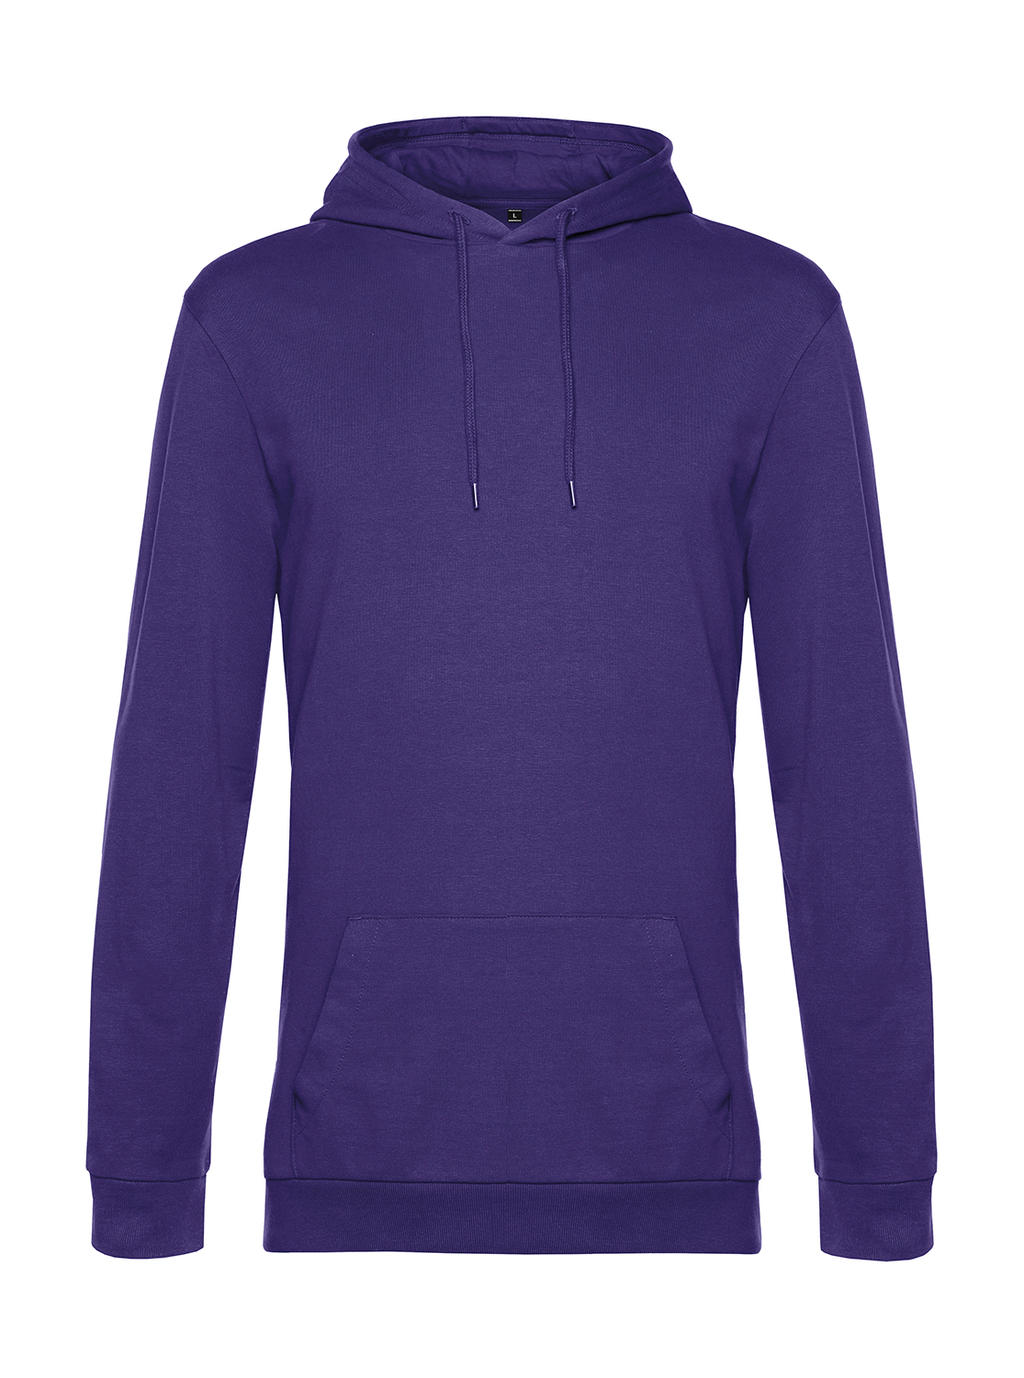  #Hoodie French Terry in Farbe Radiant Purple